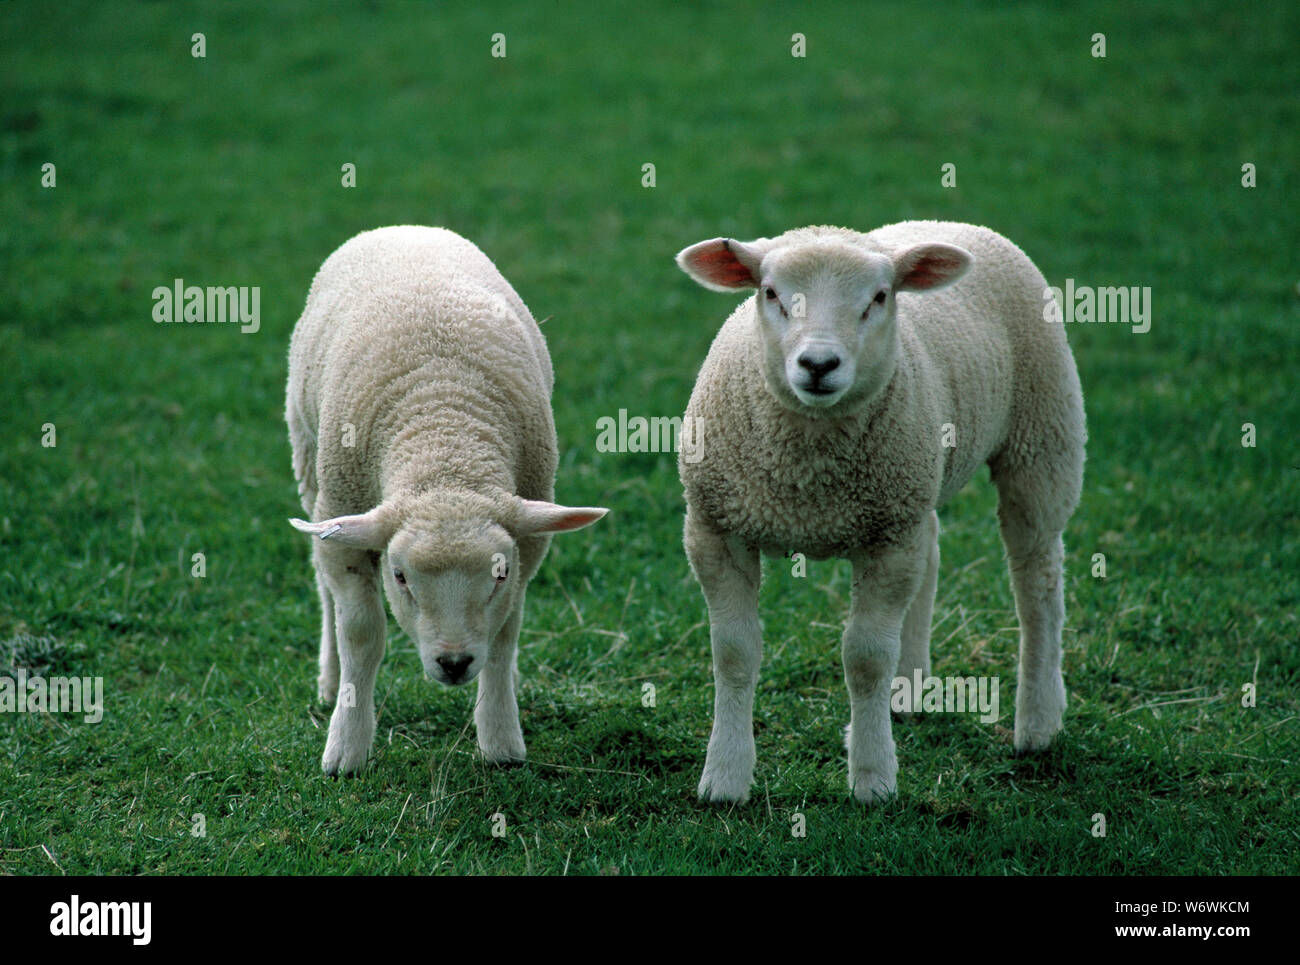 TEXEL SHEEP two young lambs in a meadow Stock Photo